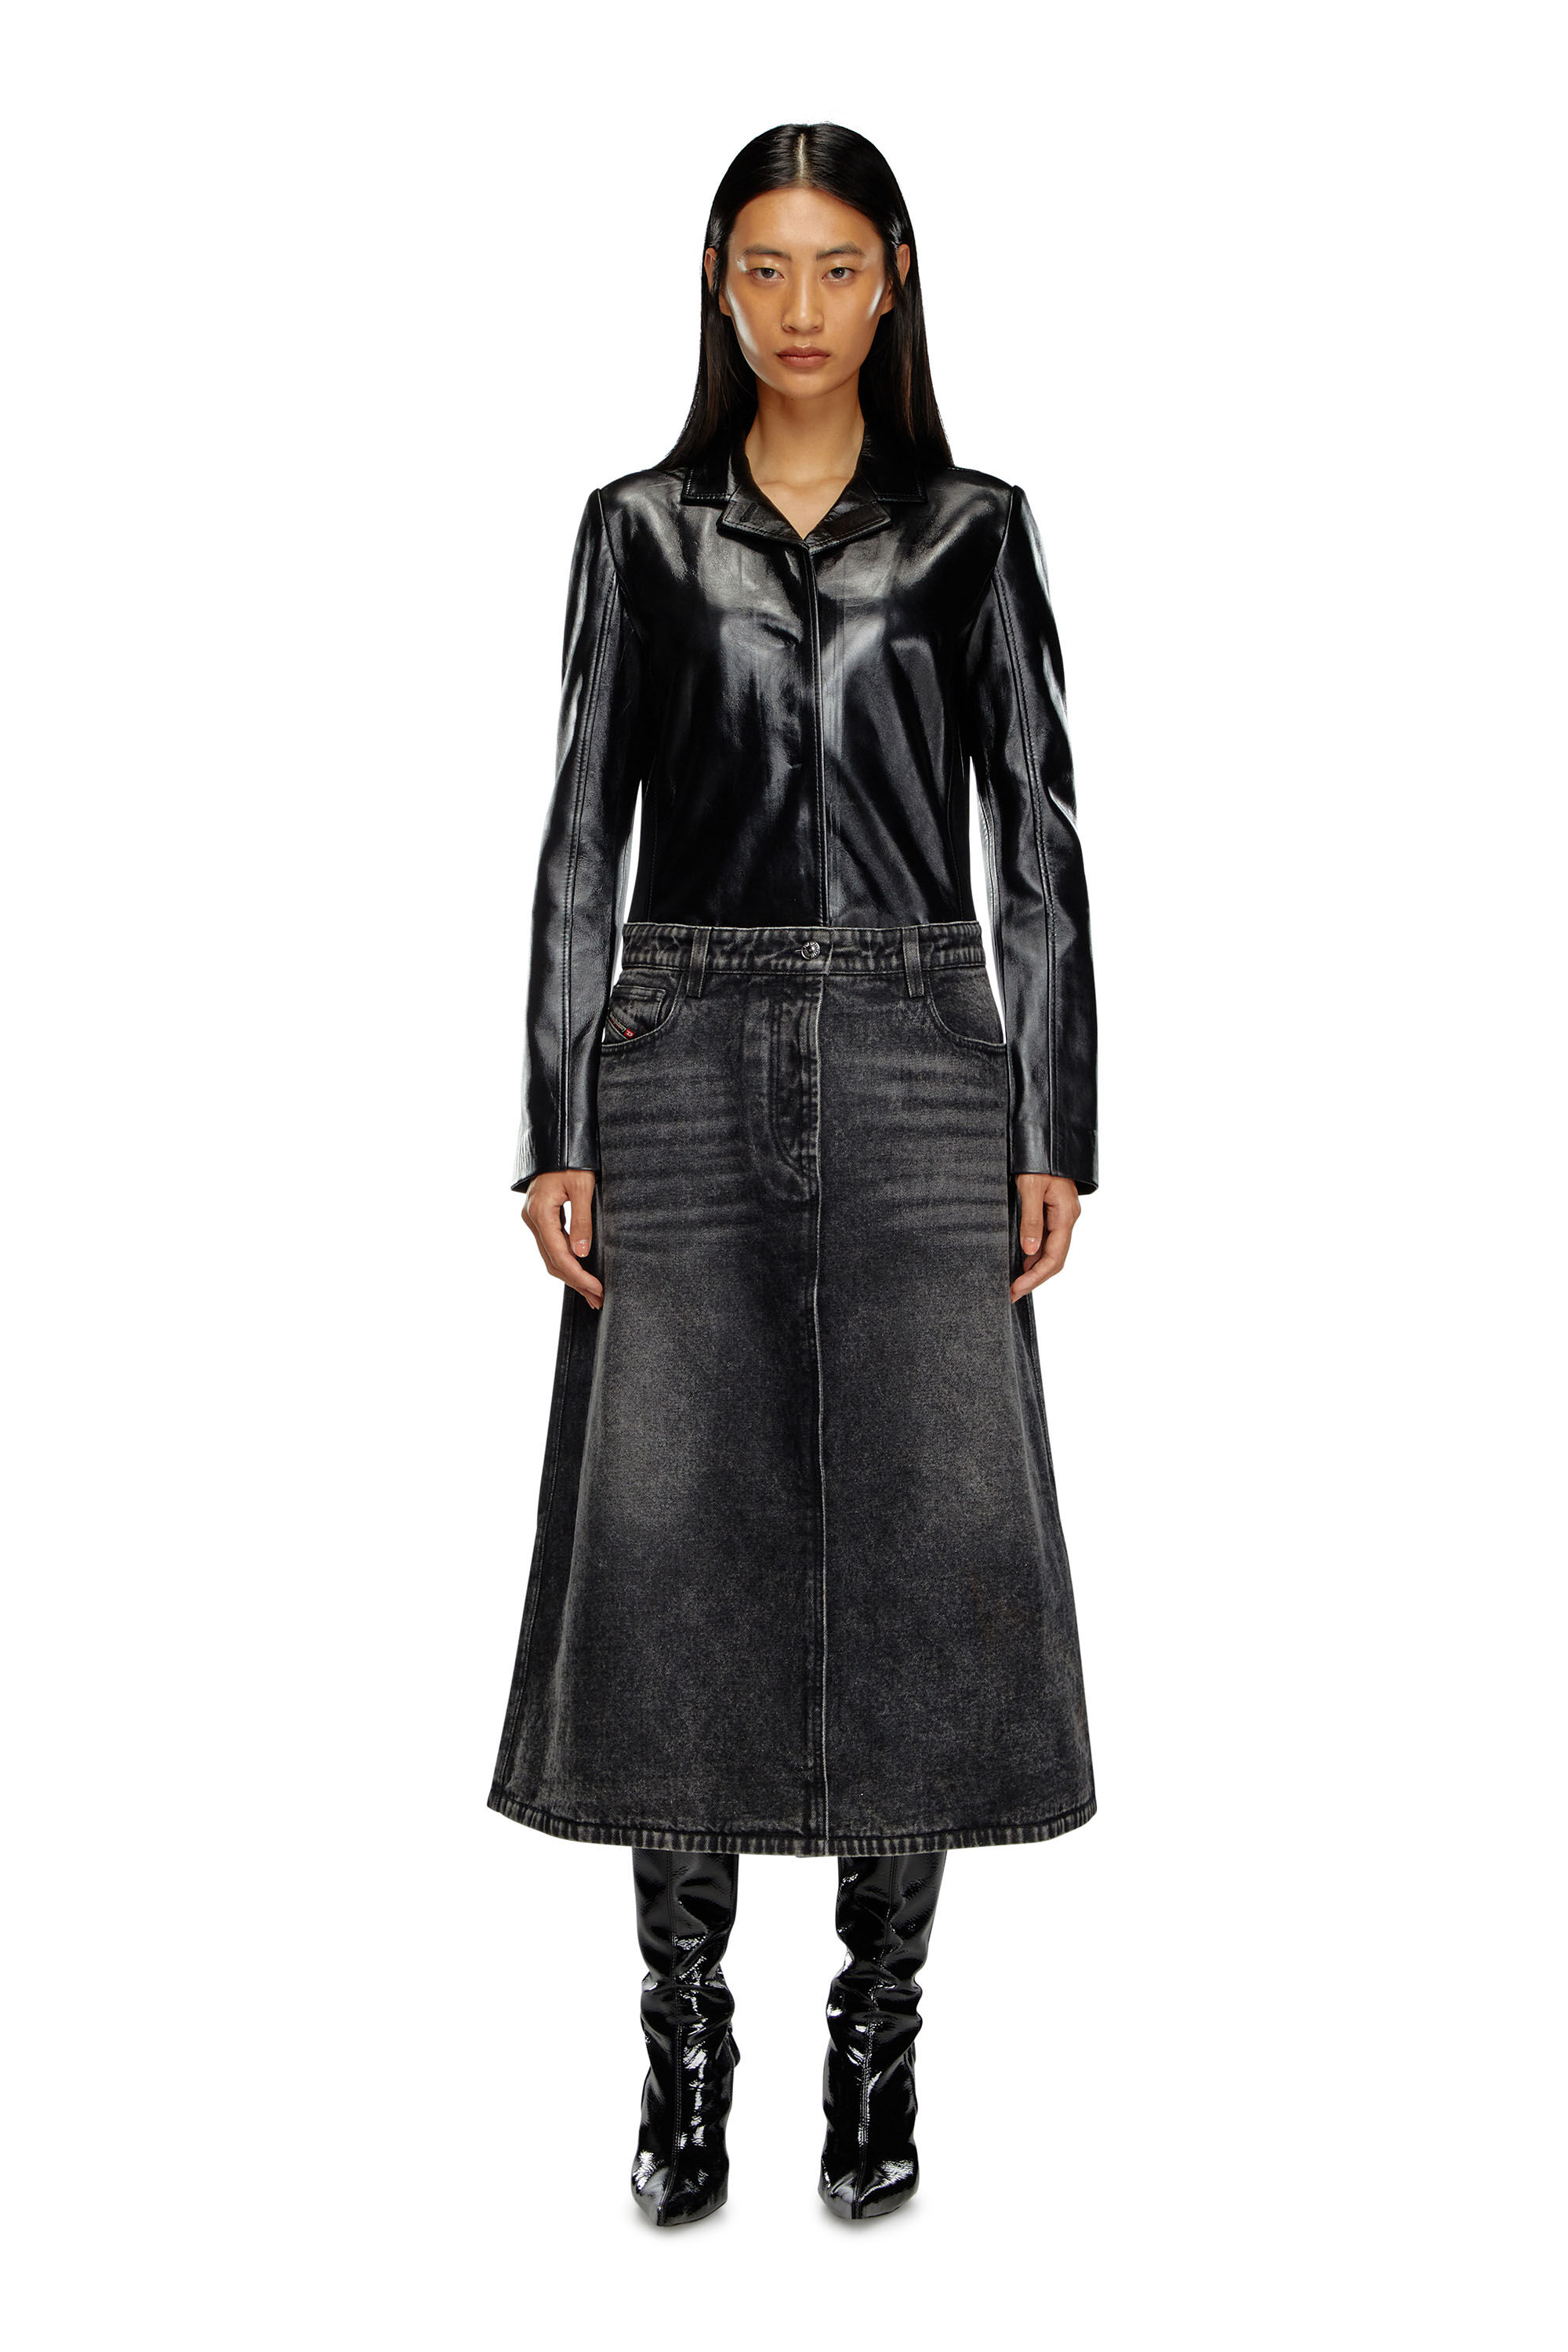 Diesel - L-ORY, Female Hybrid coat in denim and leather in ブラック - Image 1